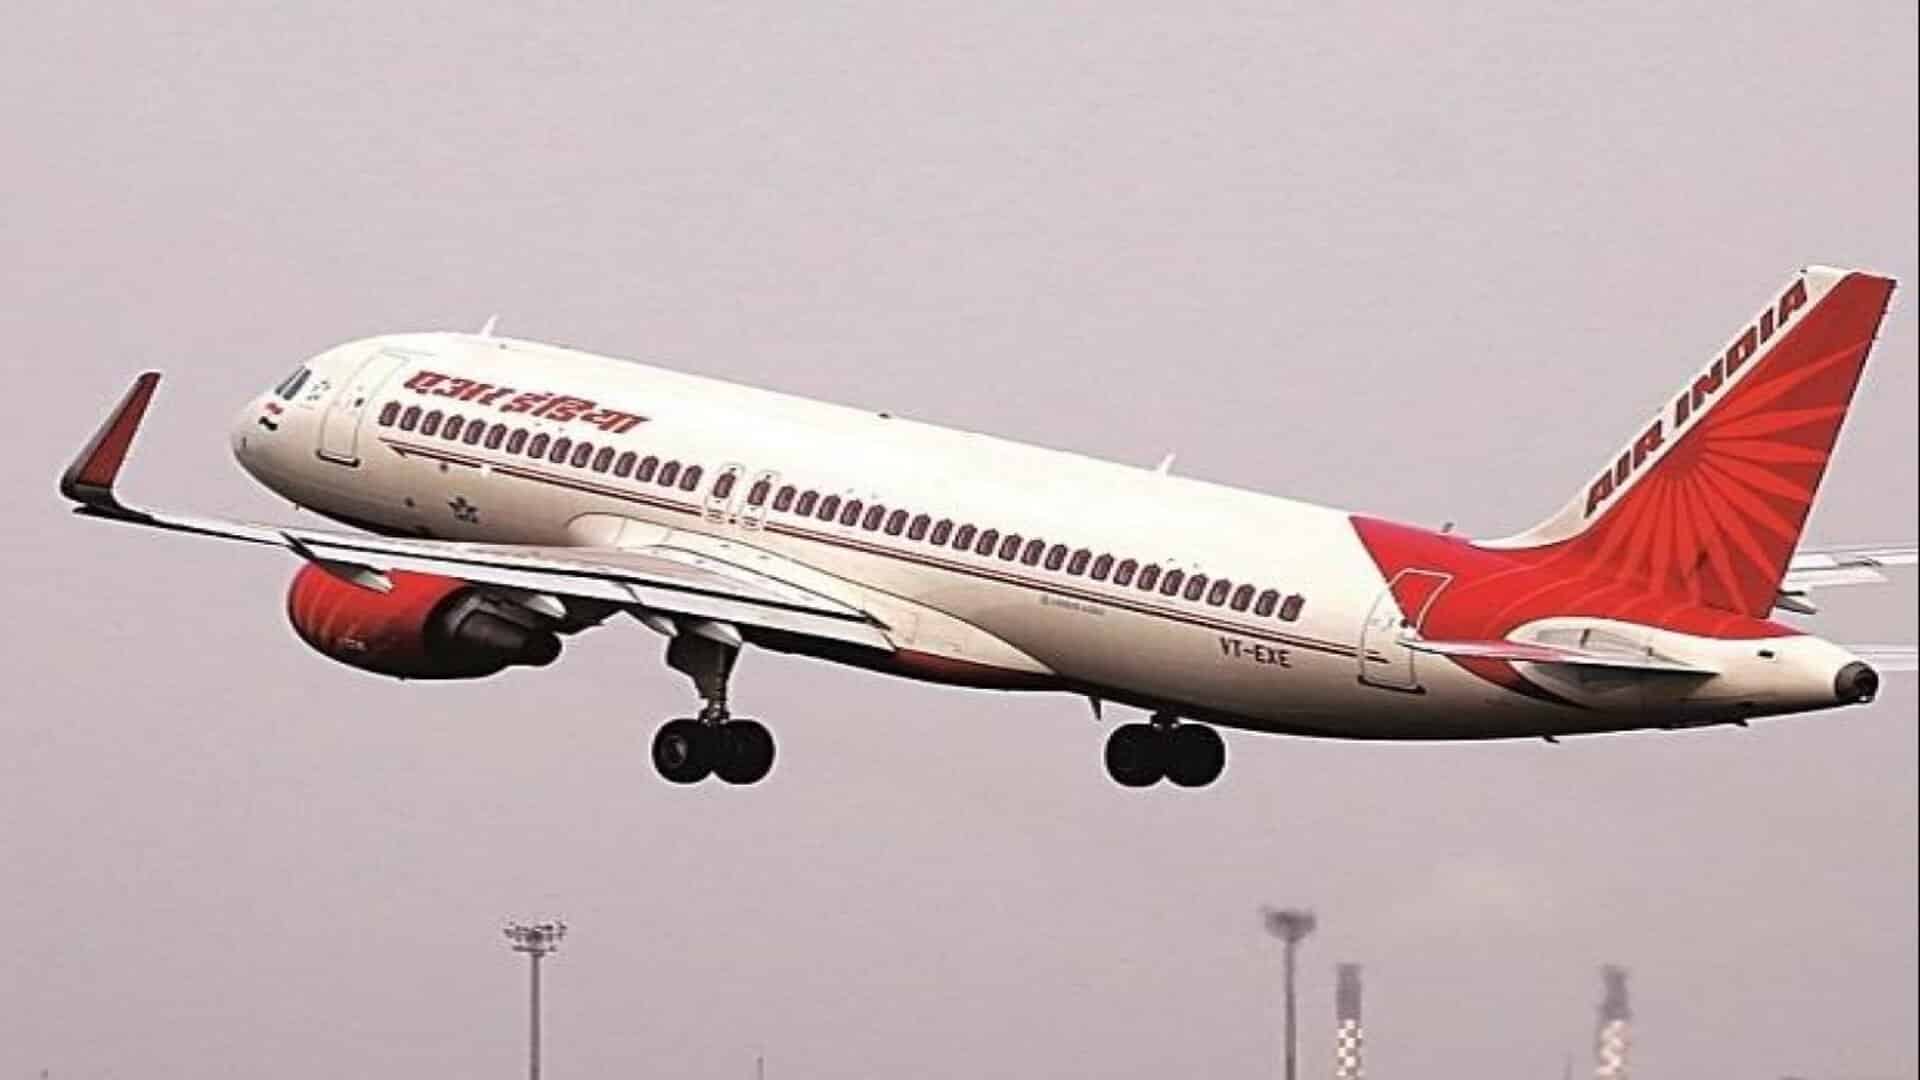 Sale of Air India an important milestone of India’s privatization efforts: IMF official